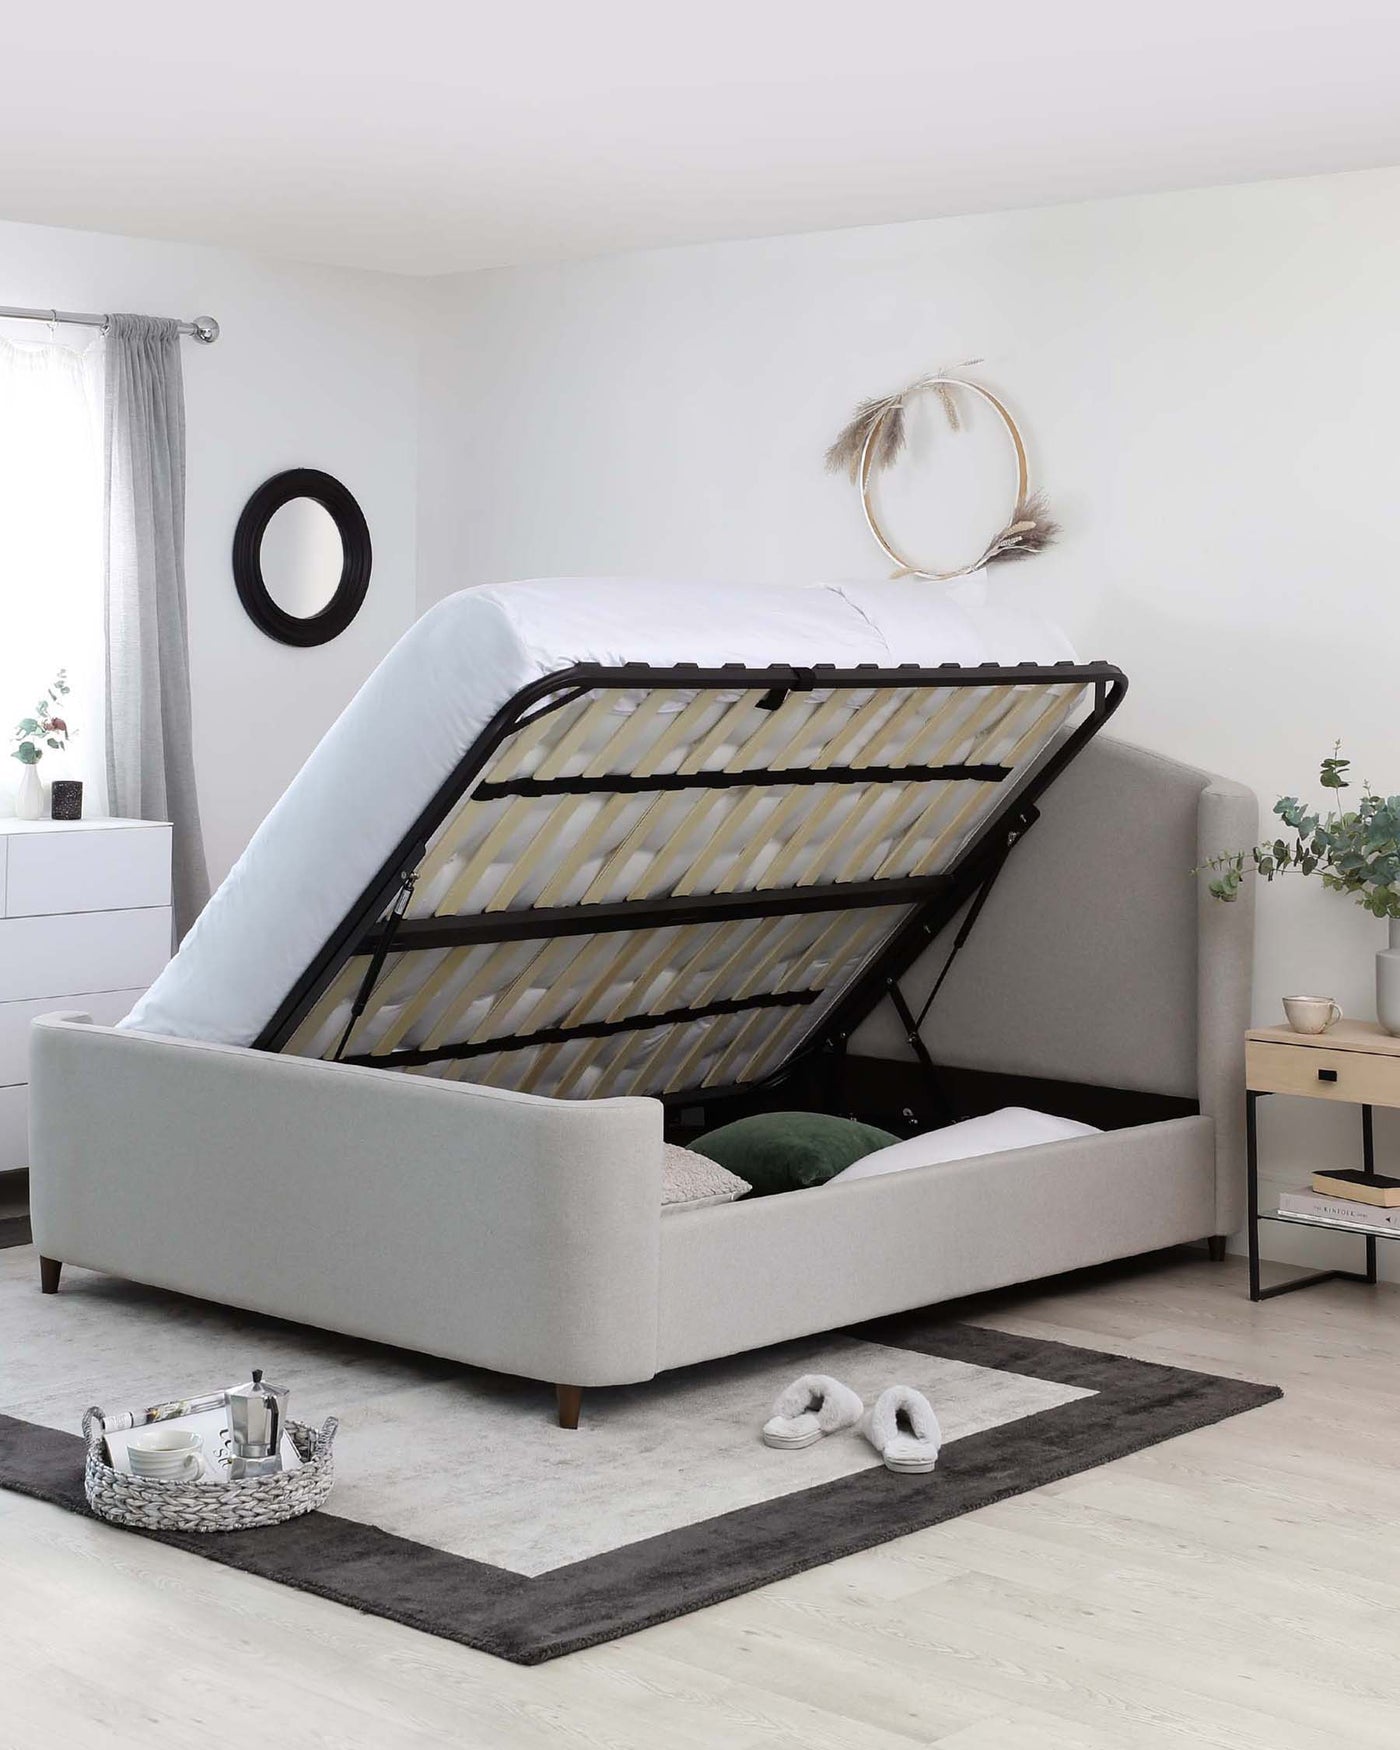 A modern light grey upholstered storage bed with a lifted mattress platform revealing an ample storage space underneath. The bed features a clean, streamlined design with a padded, fabric-covered frame and headboard, supported by four wooden legs. It's staged on a contemporary two-tone grey area rug over a light wooden floor, with minimalistic bedside tables on either side showcasing a simple, sleek white finish and handle less drawers.